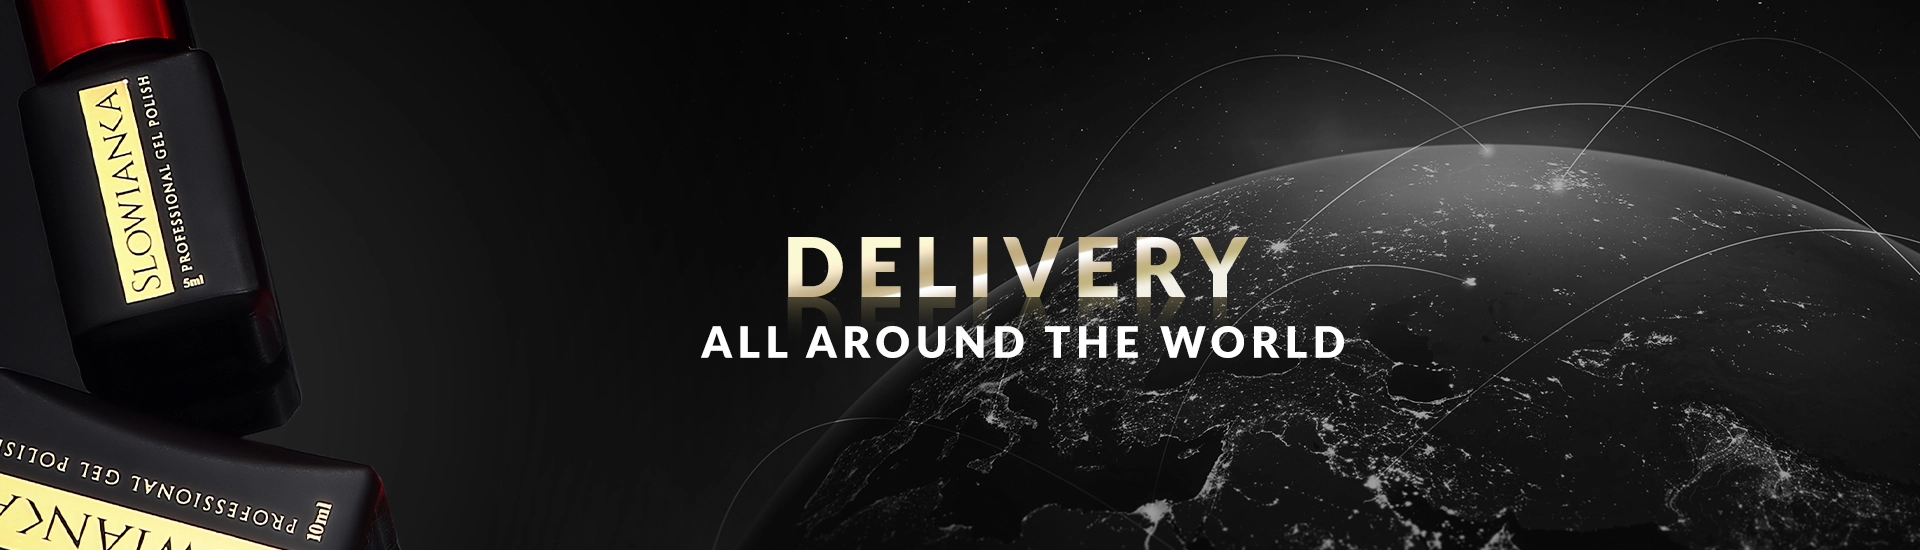 Delivery all around the world